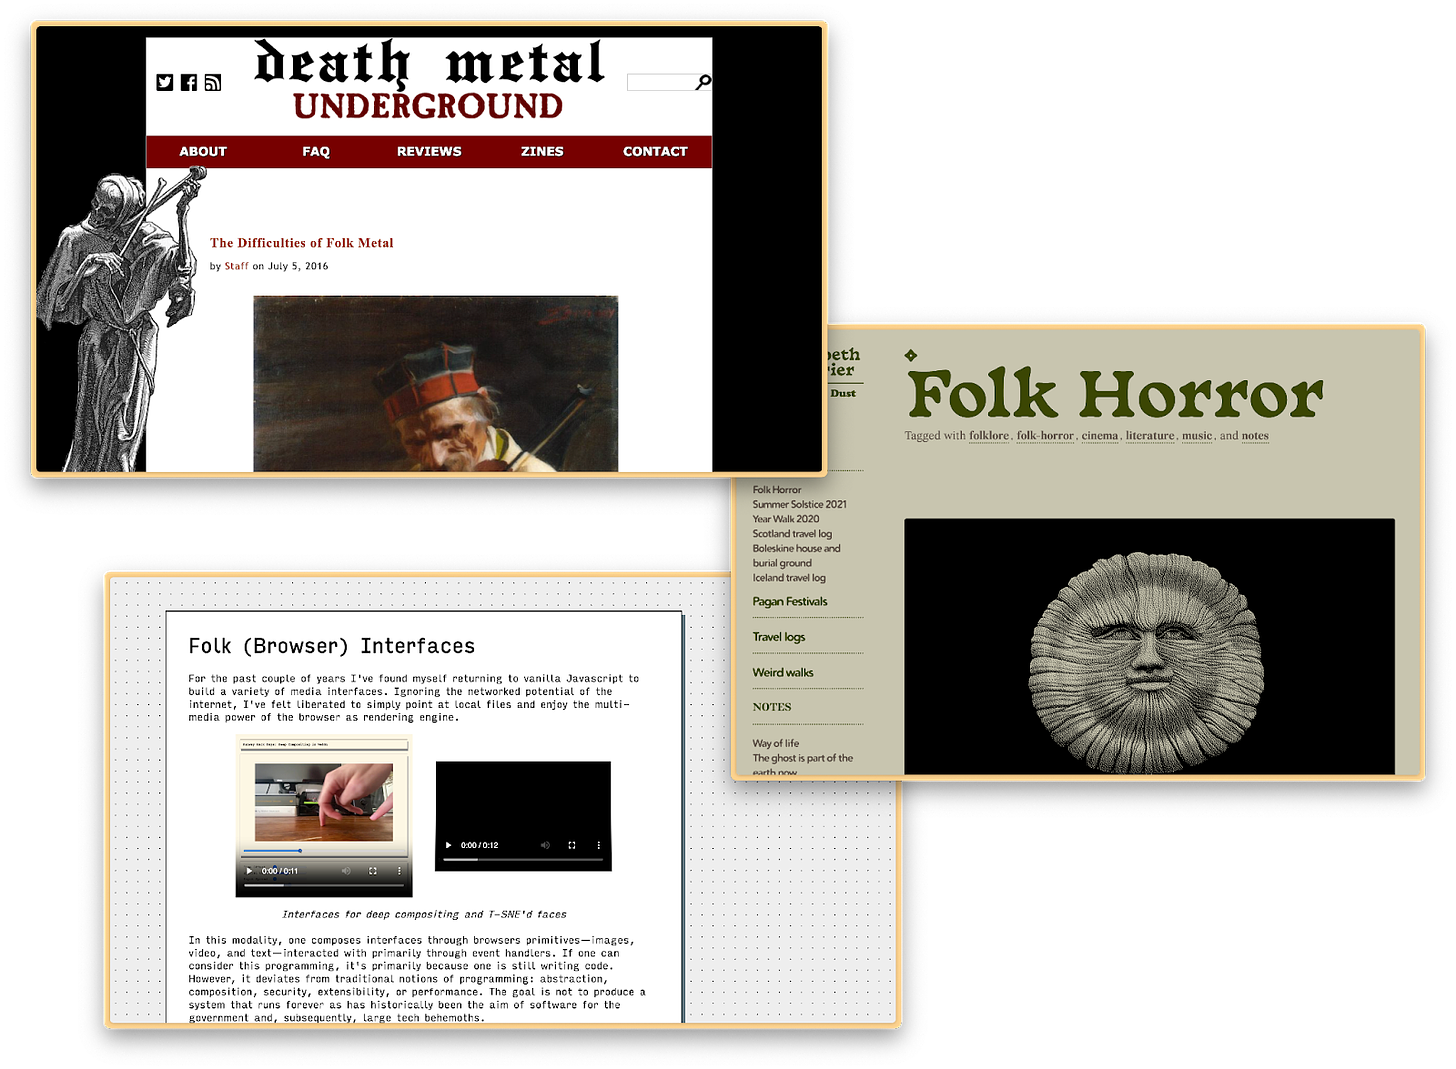 a collage of screenshots from a death metal underground website, a folk horror website, and a folk browser interfaces post